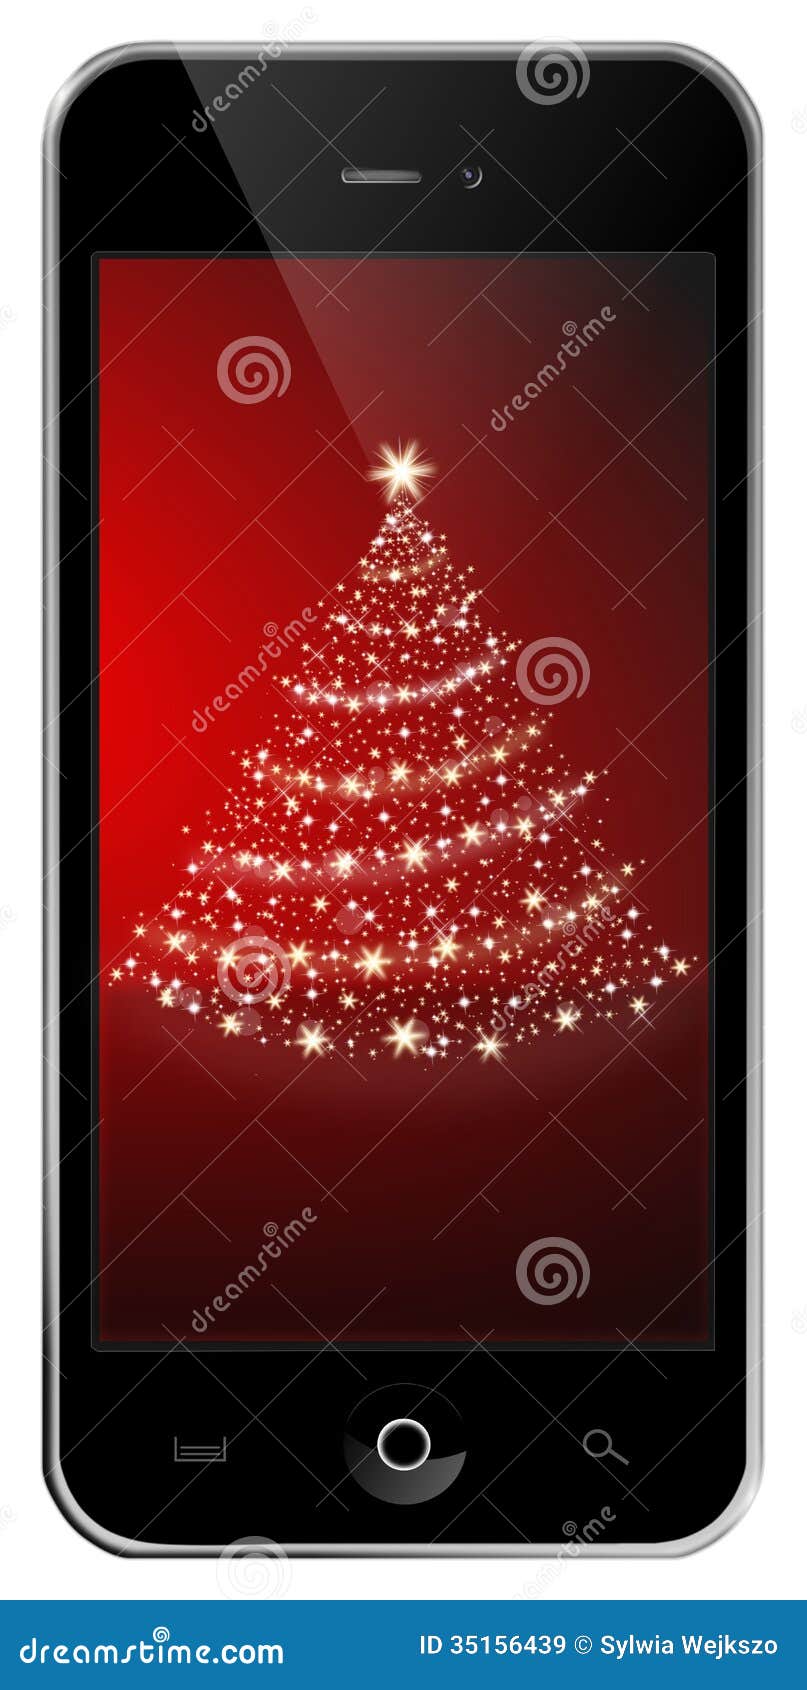 Mobile Phone With A Christmas Tree Stock Image - Image of tree, glowing ...